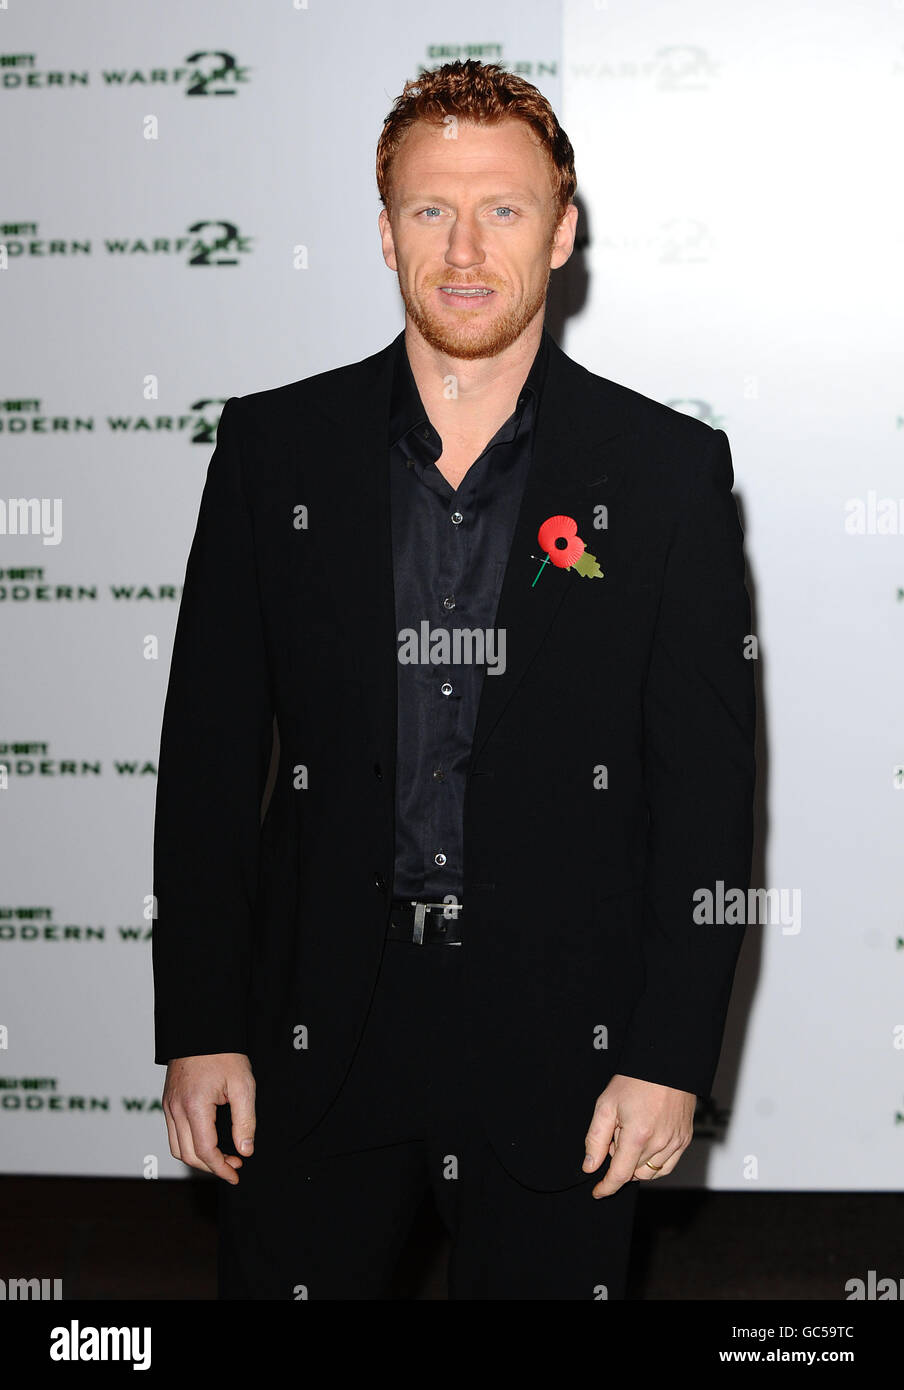 Kevin McKidd attends the launch of new game Call of Duty: Modern Warfare 2, at the Vue Cinema in London. Stock Photo